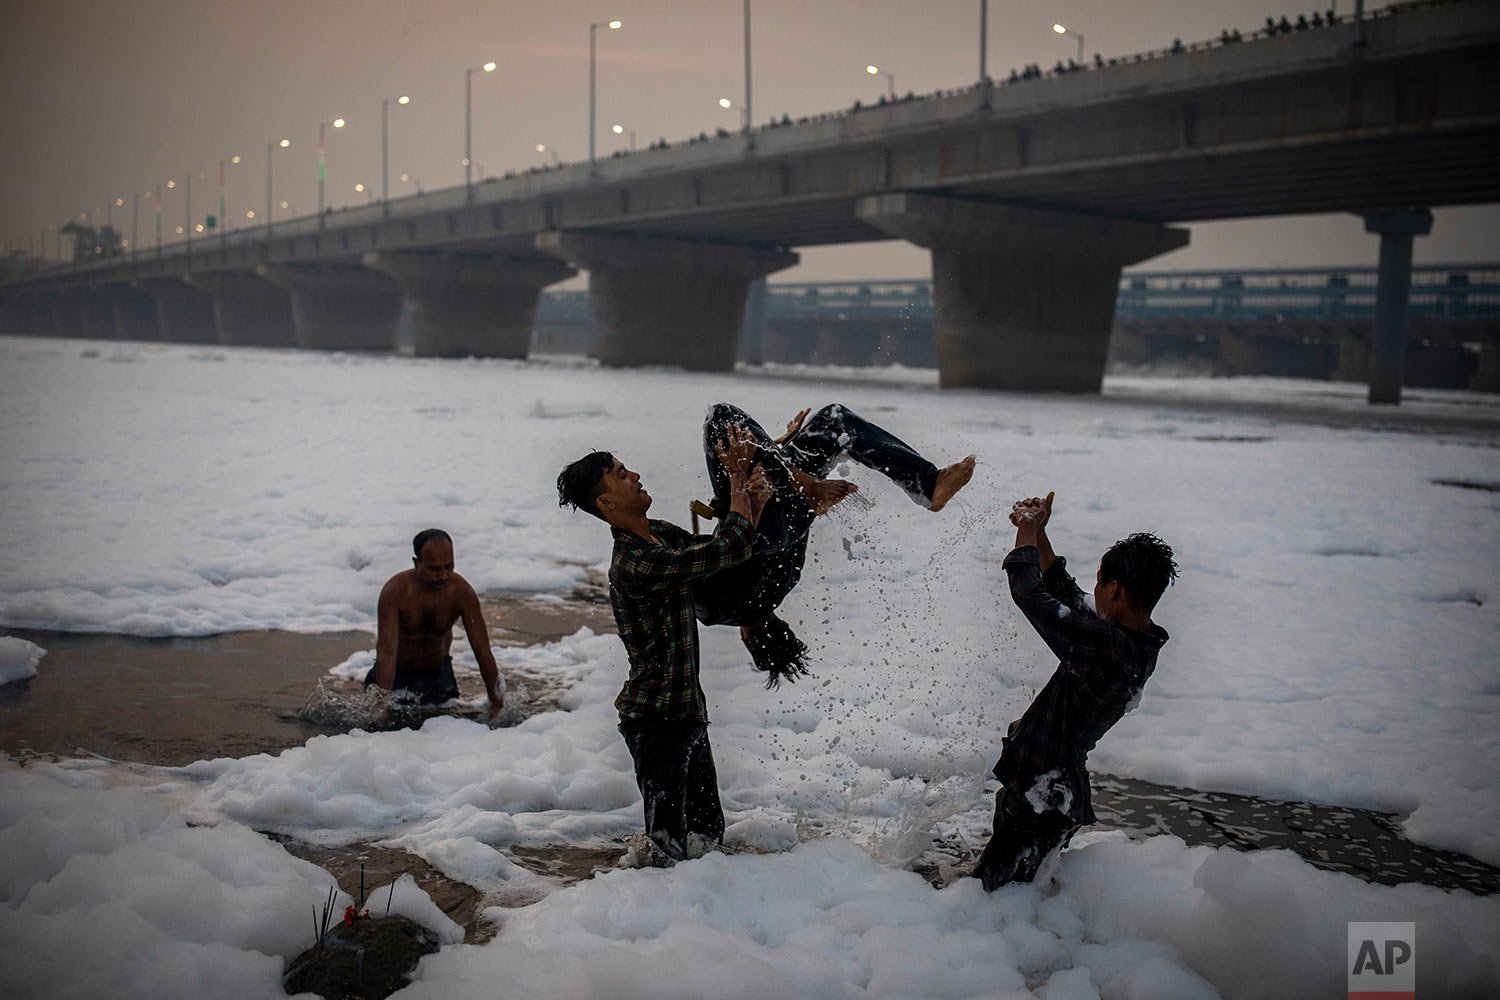  Young Hindu devotees play in Yamuna river, covered by chemical foam caused due to industrial and domestic pollution, during Chhath Puja festival in New Delhi, India, Wednesday, Nov. 10, 2021. (AP Photo/Altaf Qadri) 